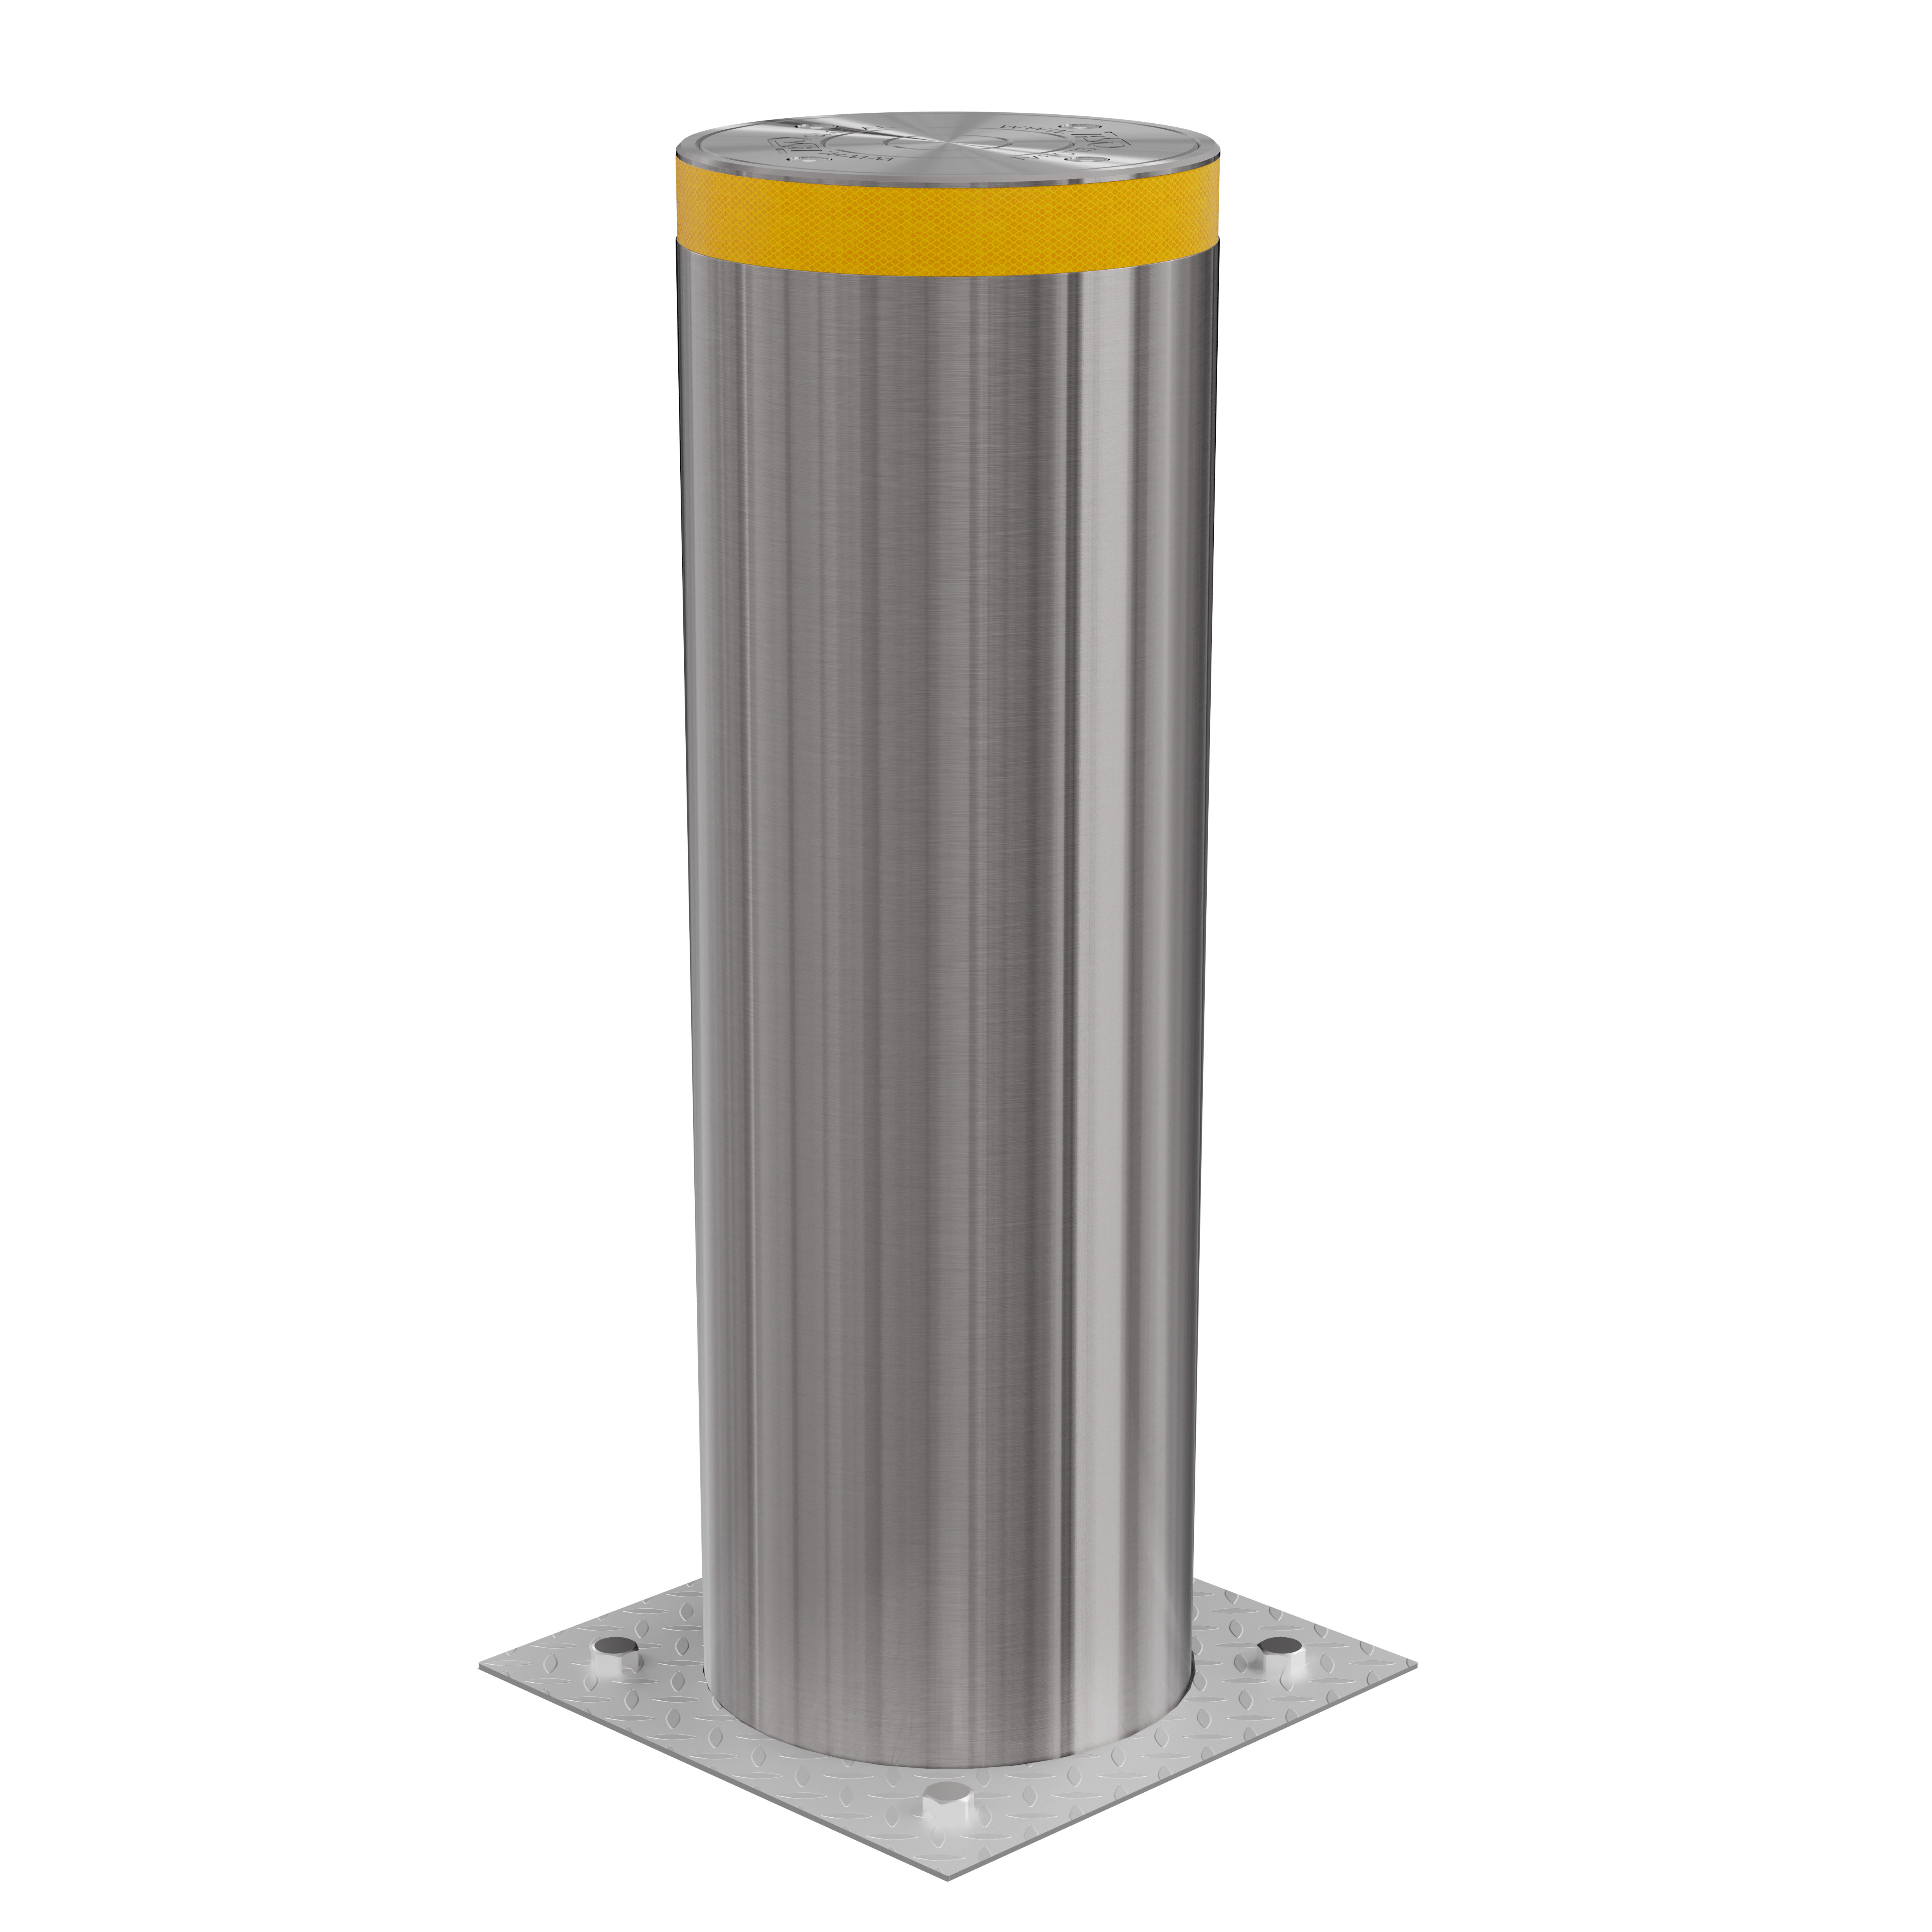 M50 HIGH SECURITY FIXED/REMOVABLE BOLLARDS